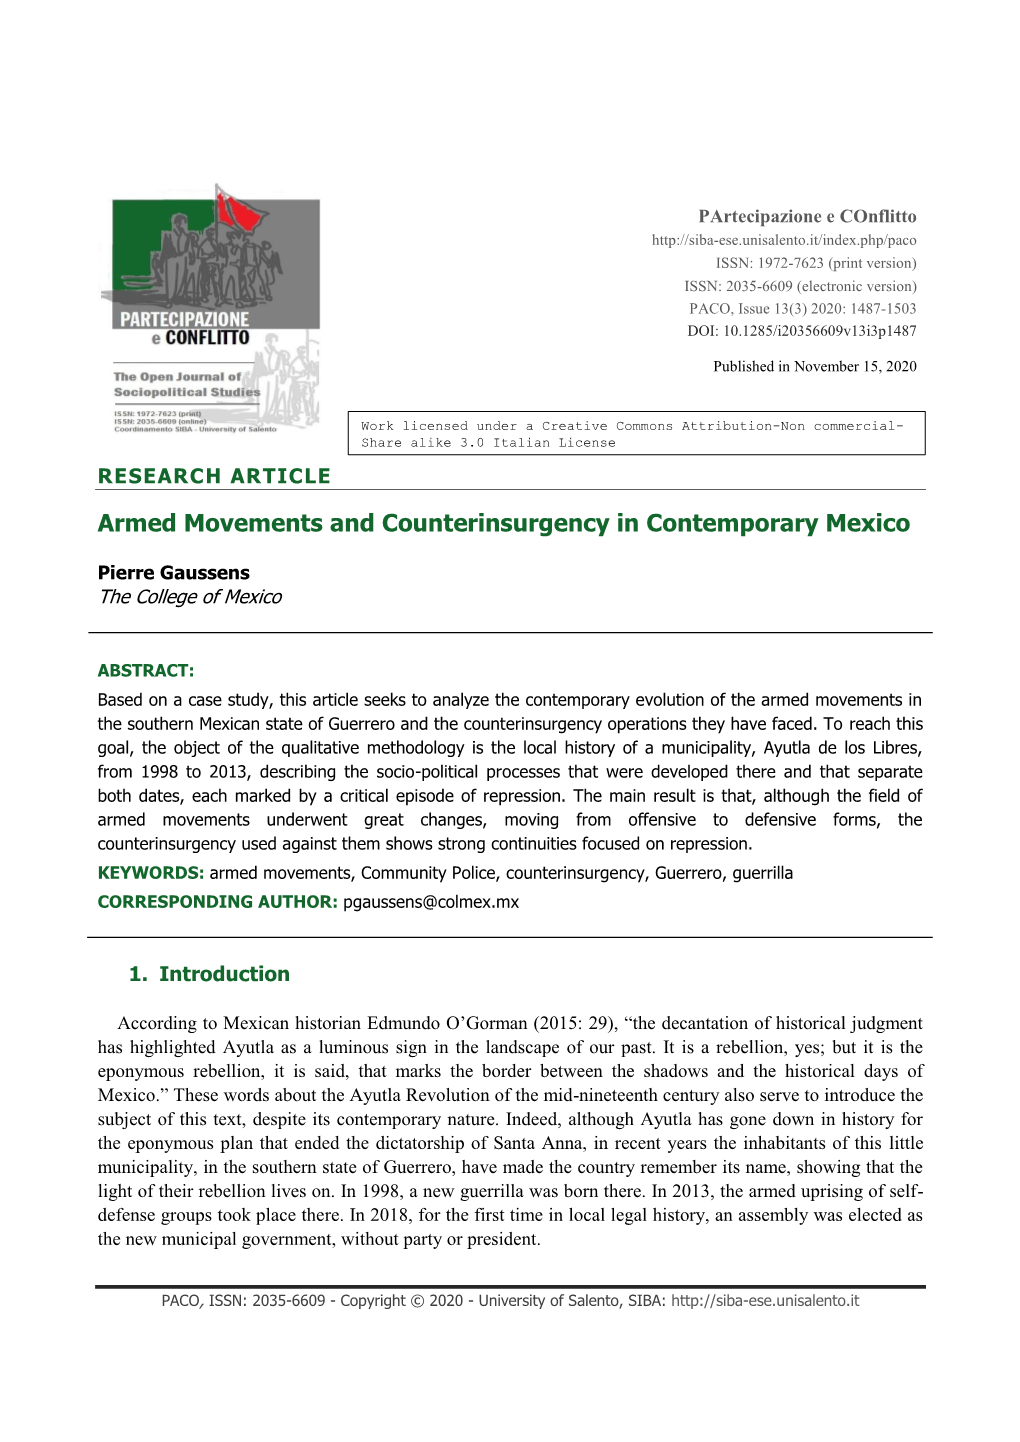 Armed Movements and Counterinsurgency in Contemporary Mexico